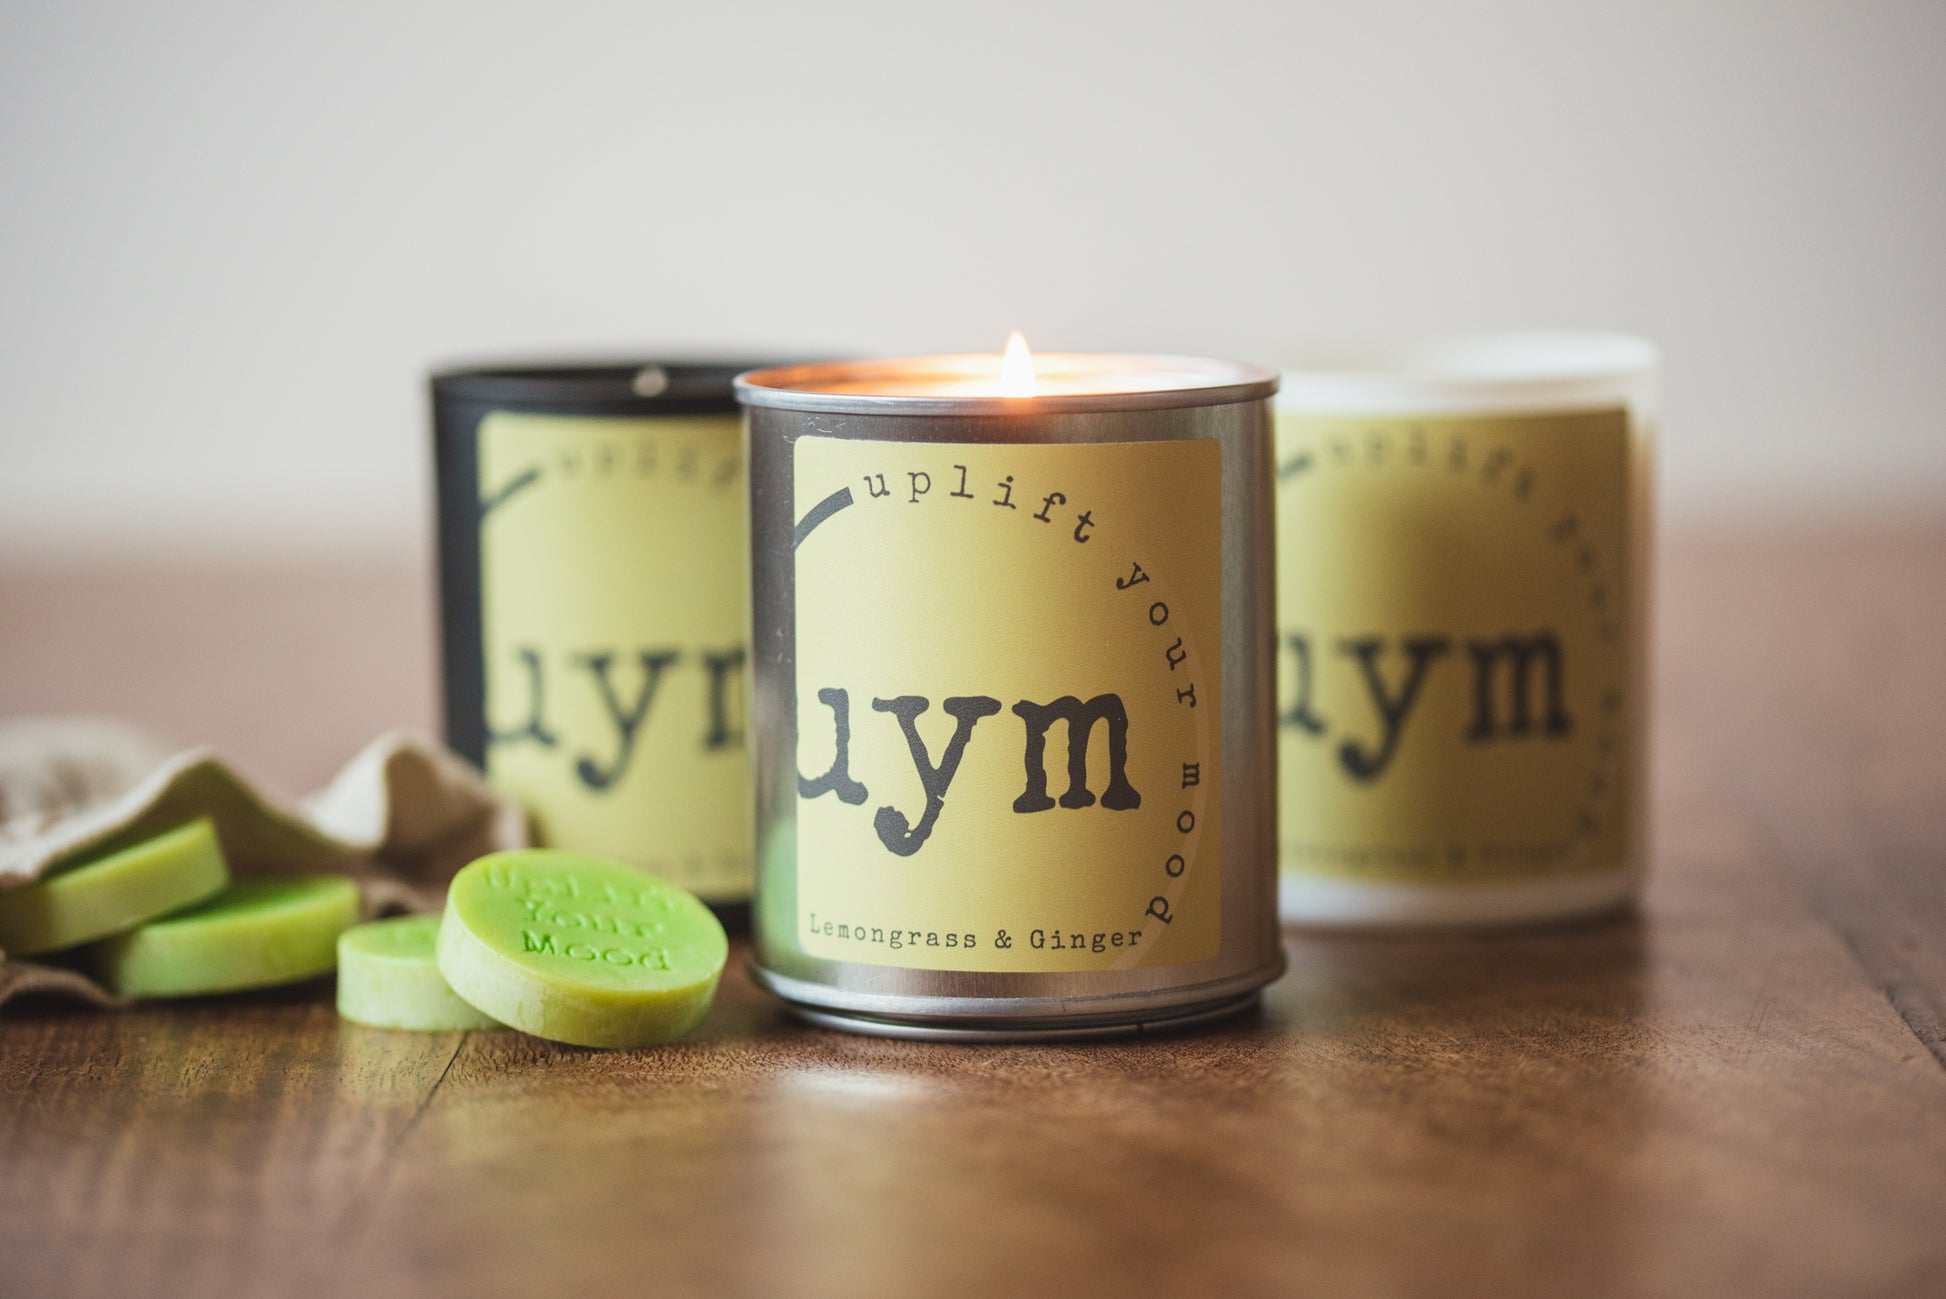 Lemongrass & Ginger Candle, varoius candle containers, scenyed natural wax melts in coton bag,Uplift Your Mood Scents